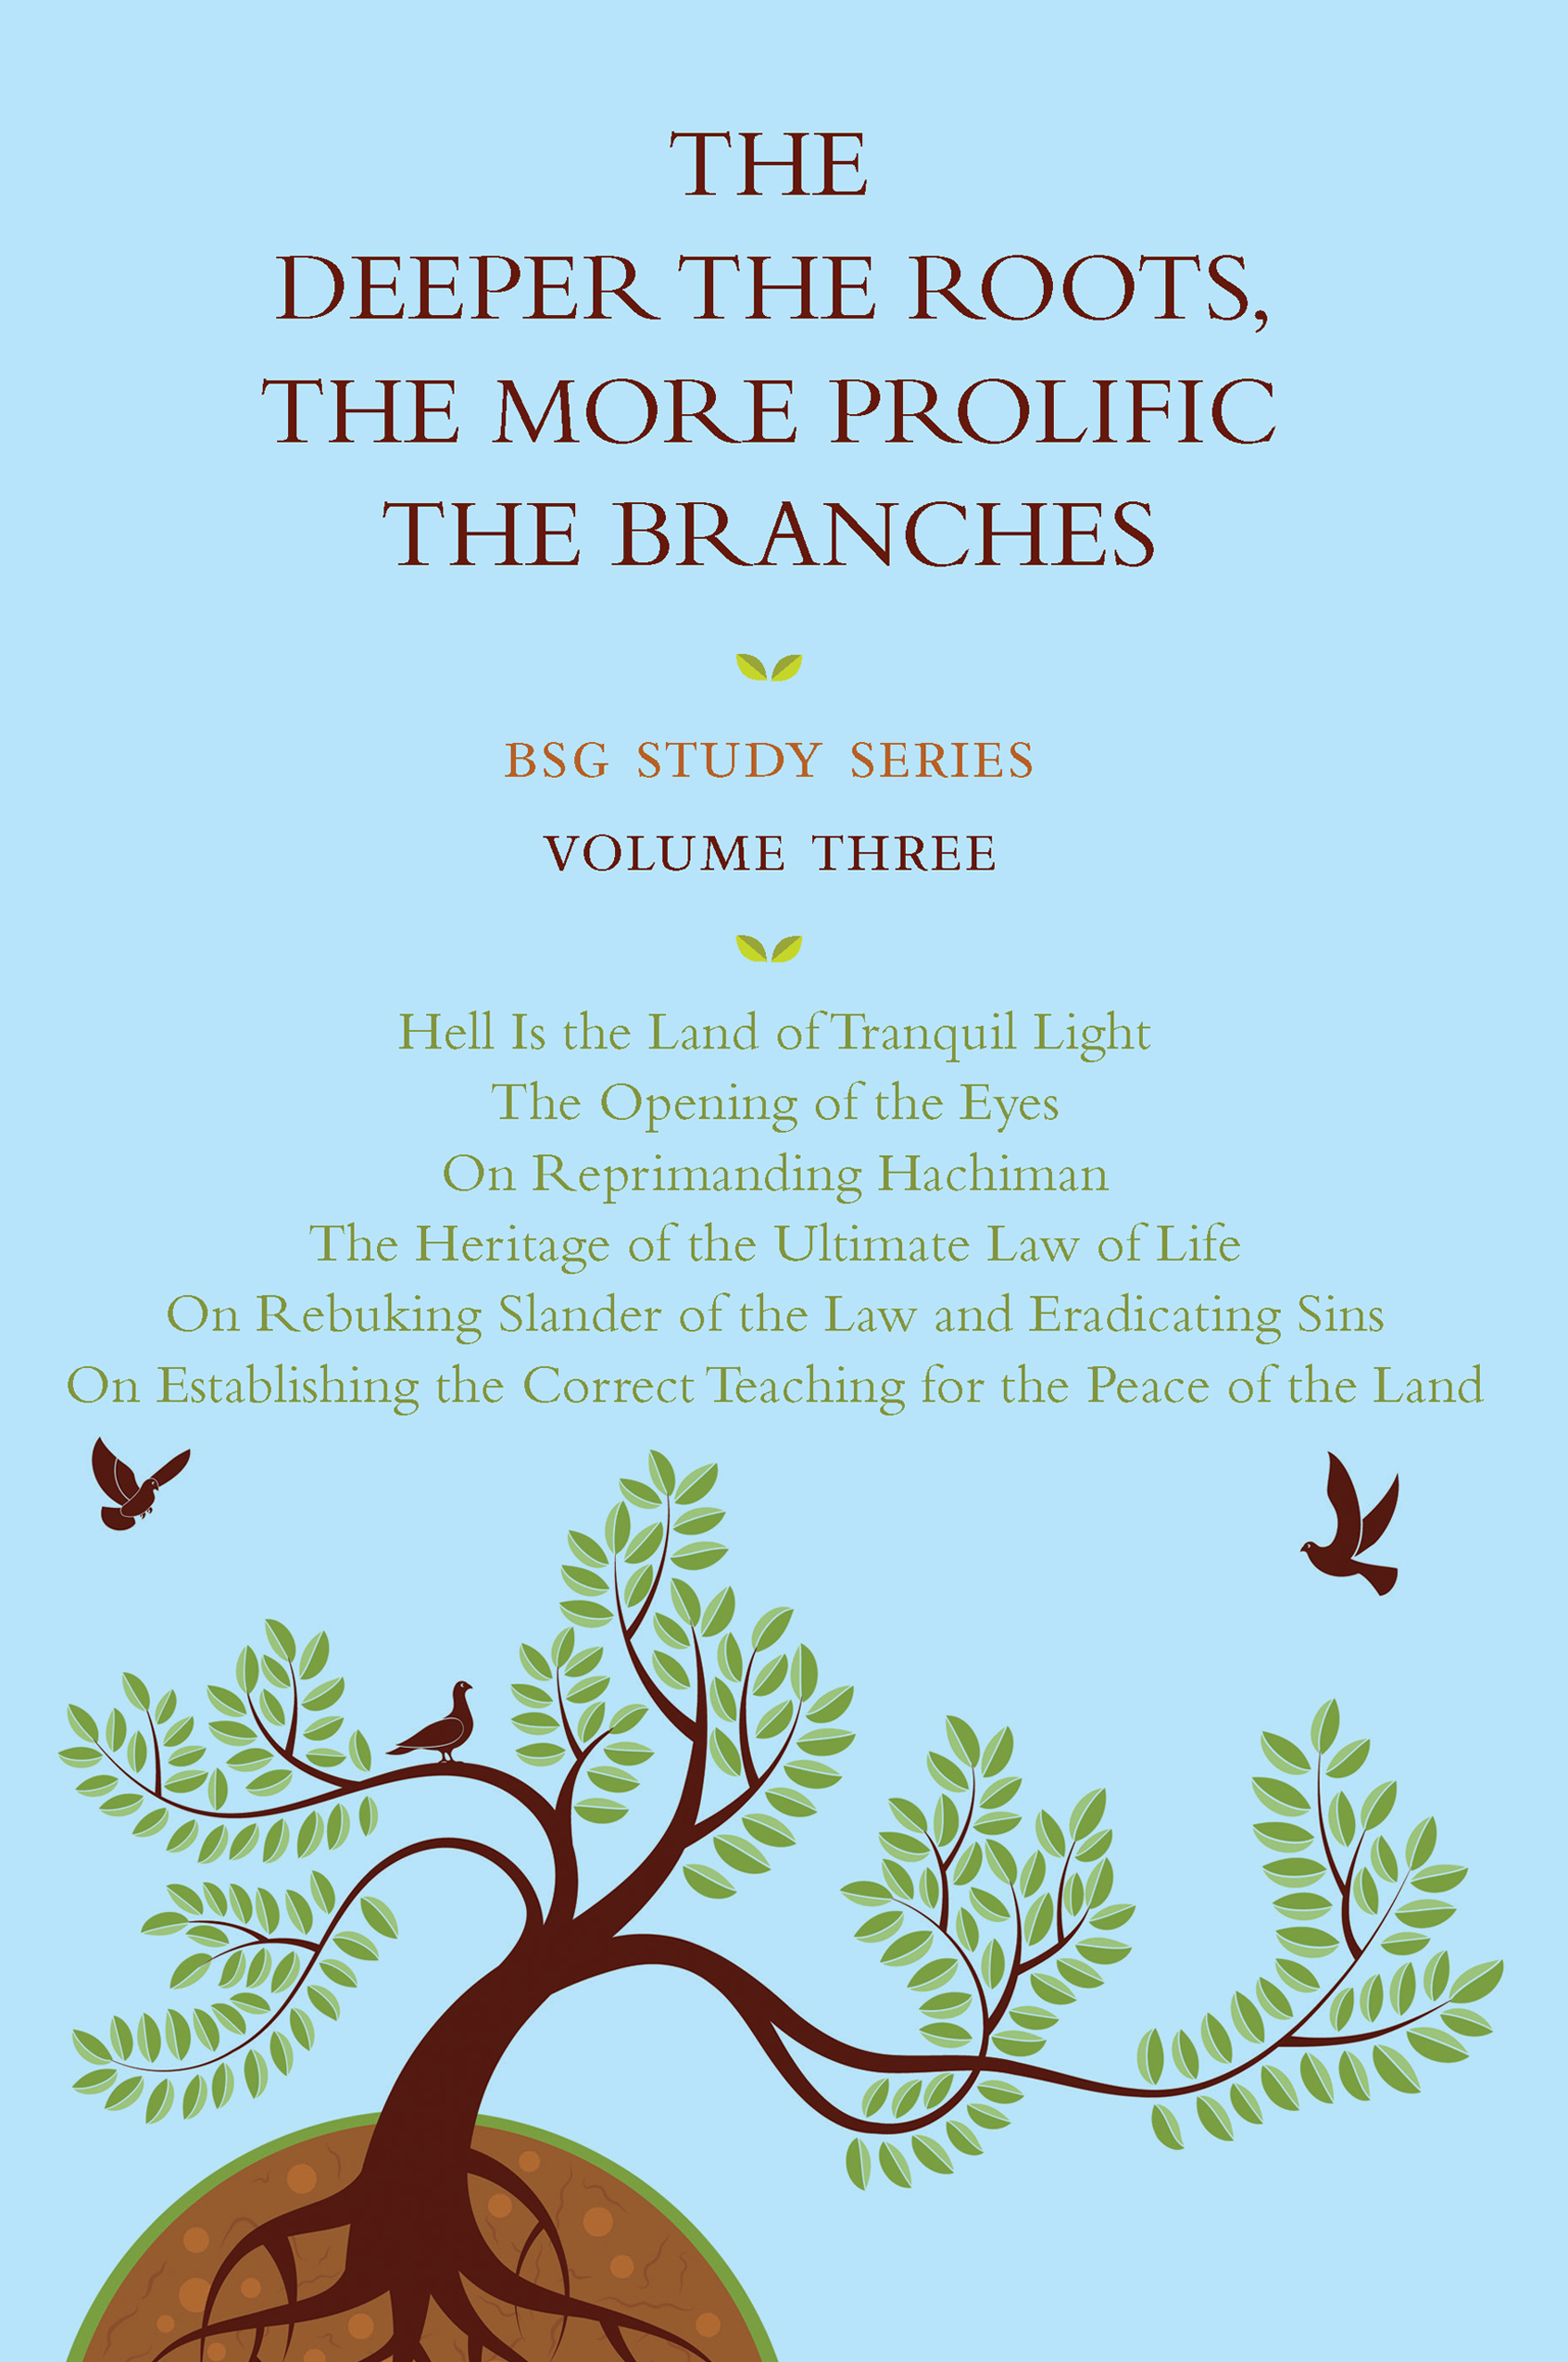 The deeper the roots the more prolific the branches vol 3